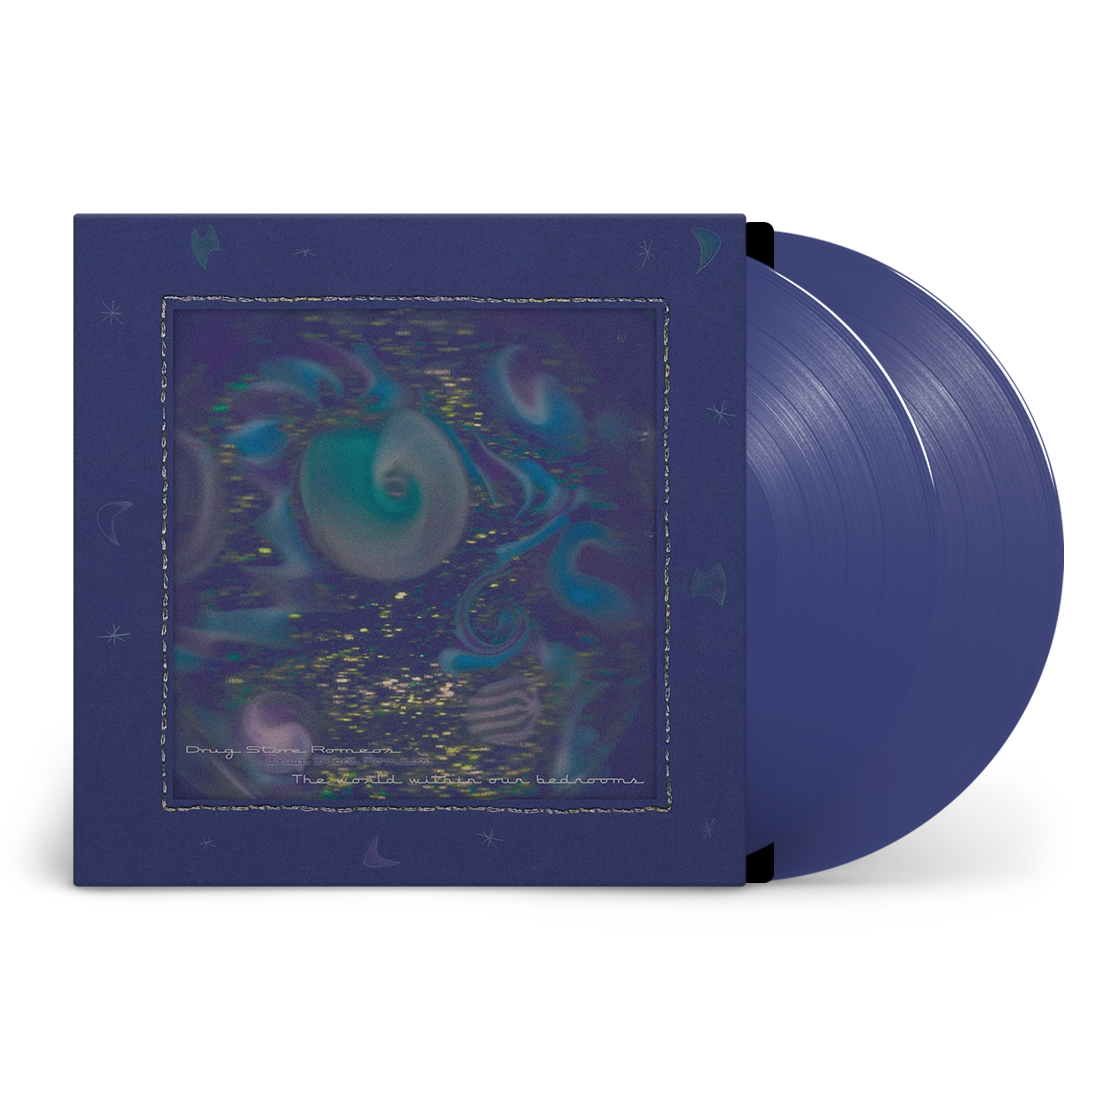 Drug Store Romeos - The World Within Our Bedrooms (Limited Edition Blue Vinyl)